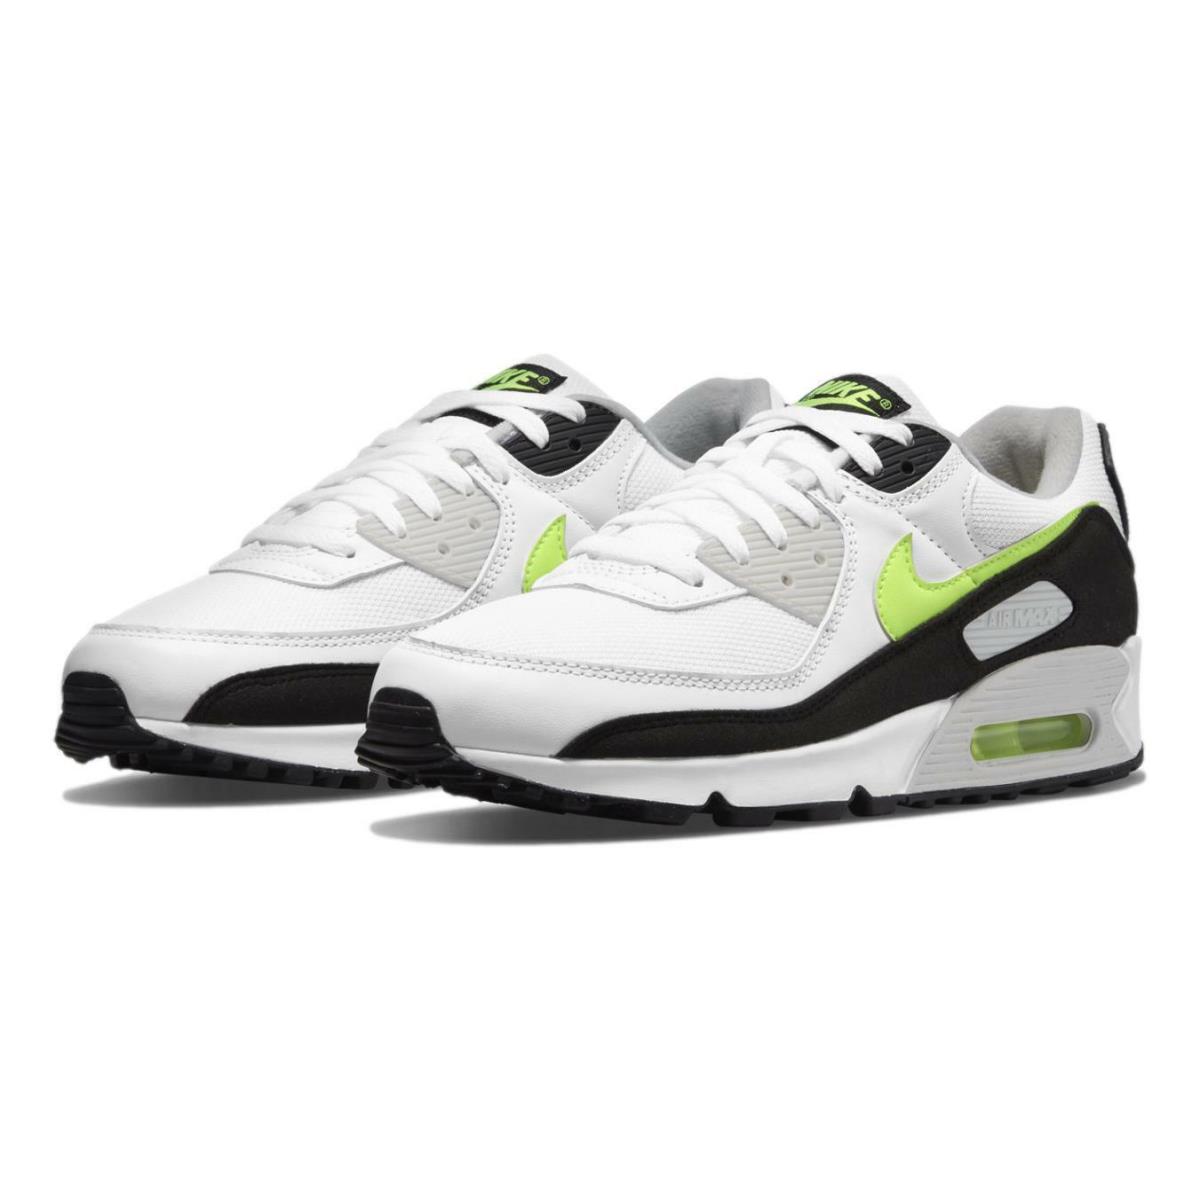 Nike Air Max 90 `white Hot Lime` Men`s Shoes Sneakers CZ1846-100